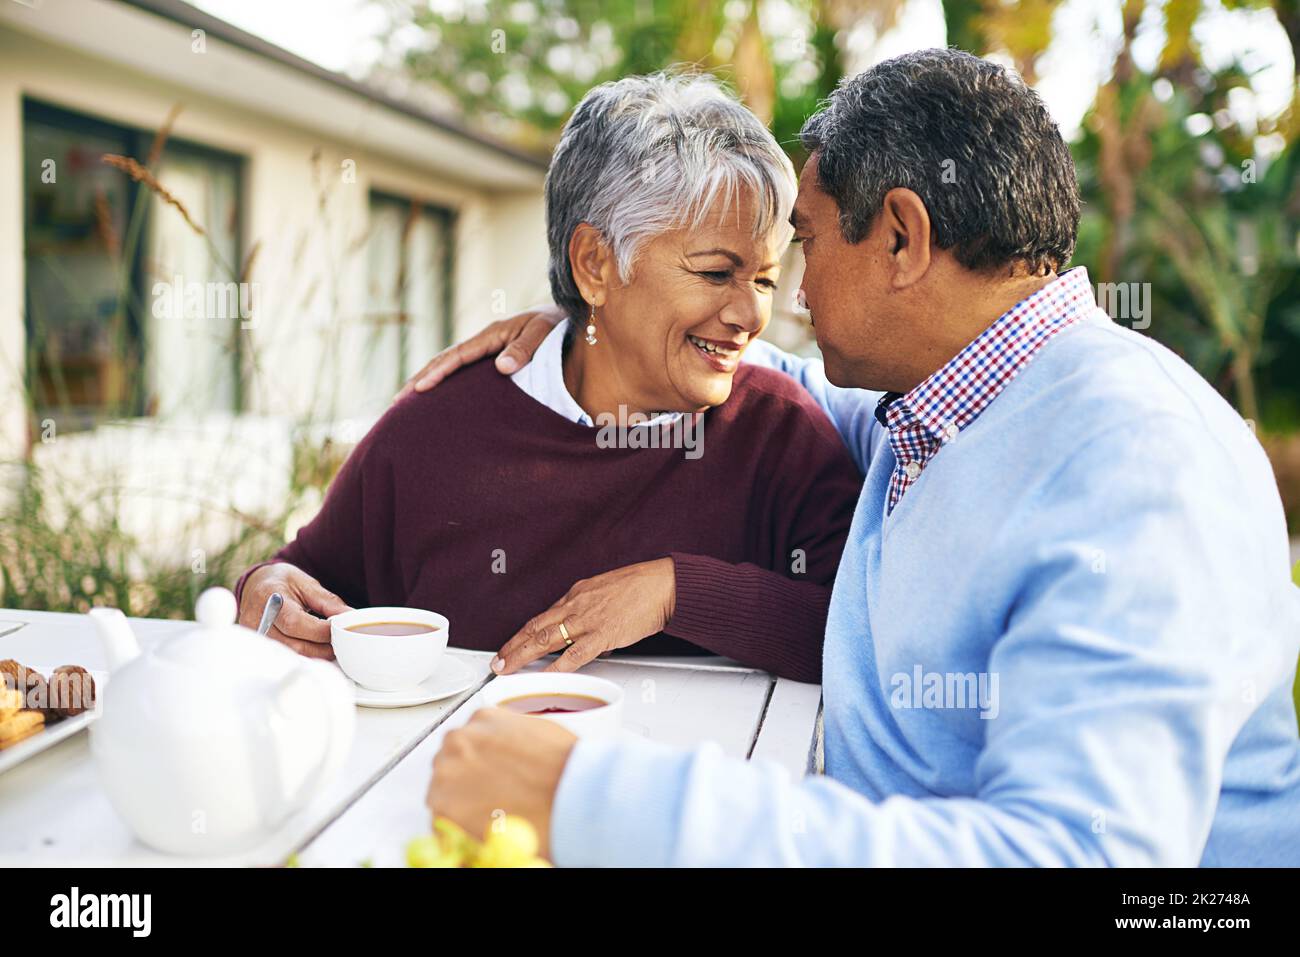 Retirement - More time for romance. Shot of a happy older couple having tea together outdoors. Stock Photo